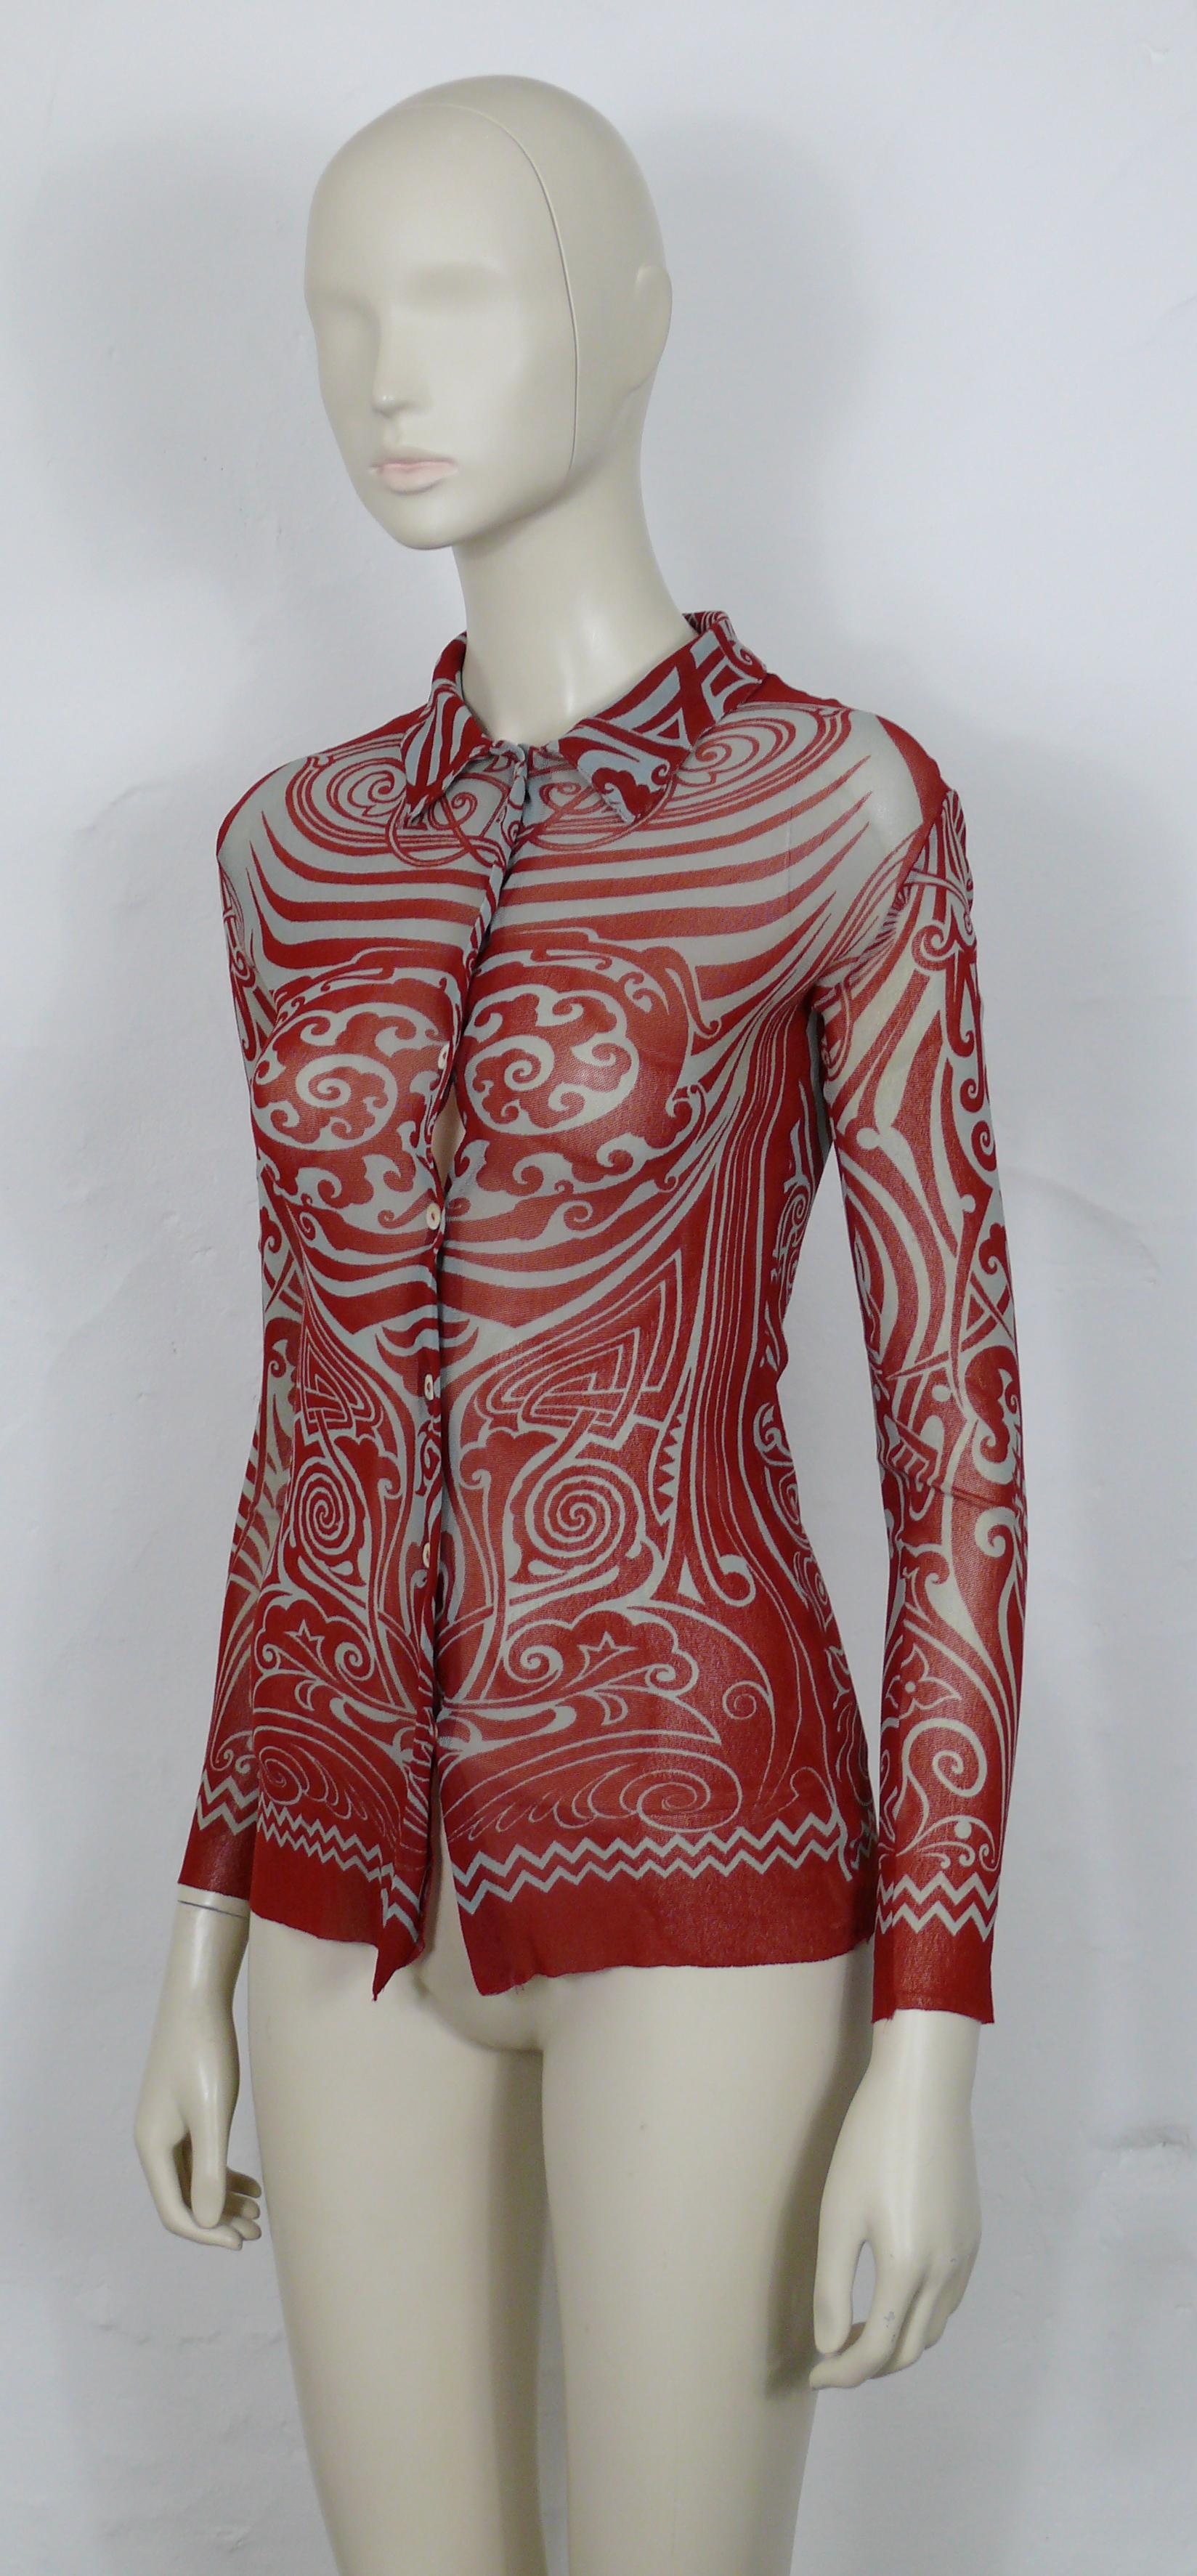 Jean Paul Gaultier Vintage 1996 Iconic Tribal Tattoo Print Mesh Shirt In Good Condition For Sale In Nice, FR